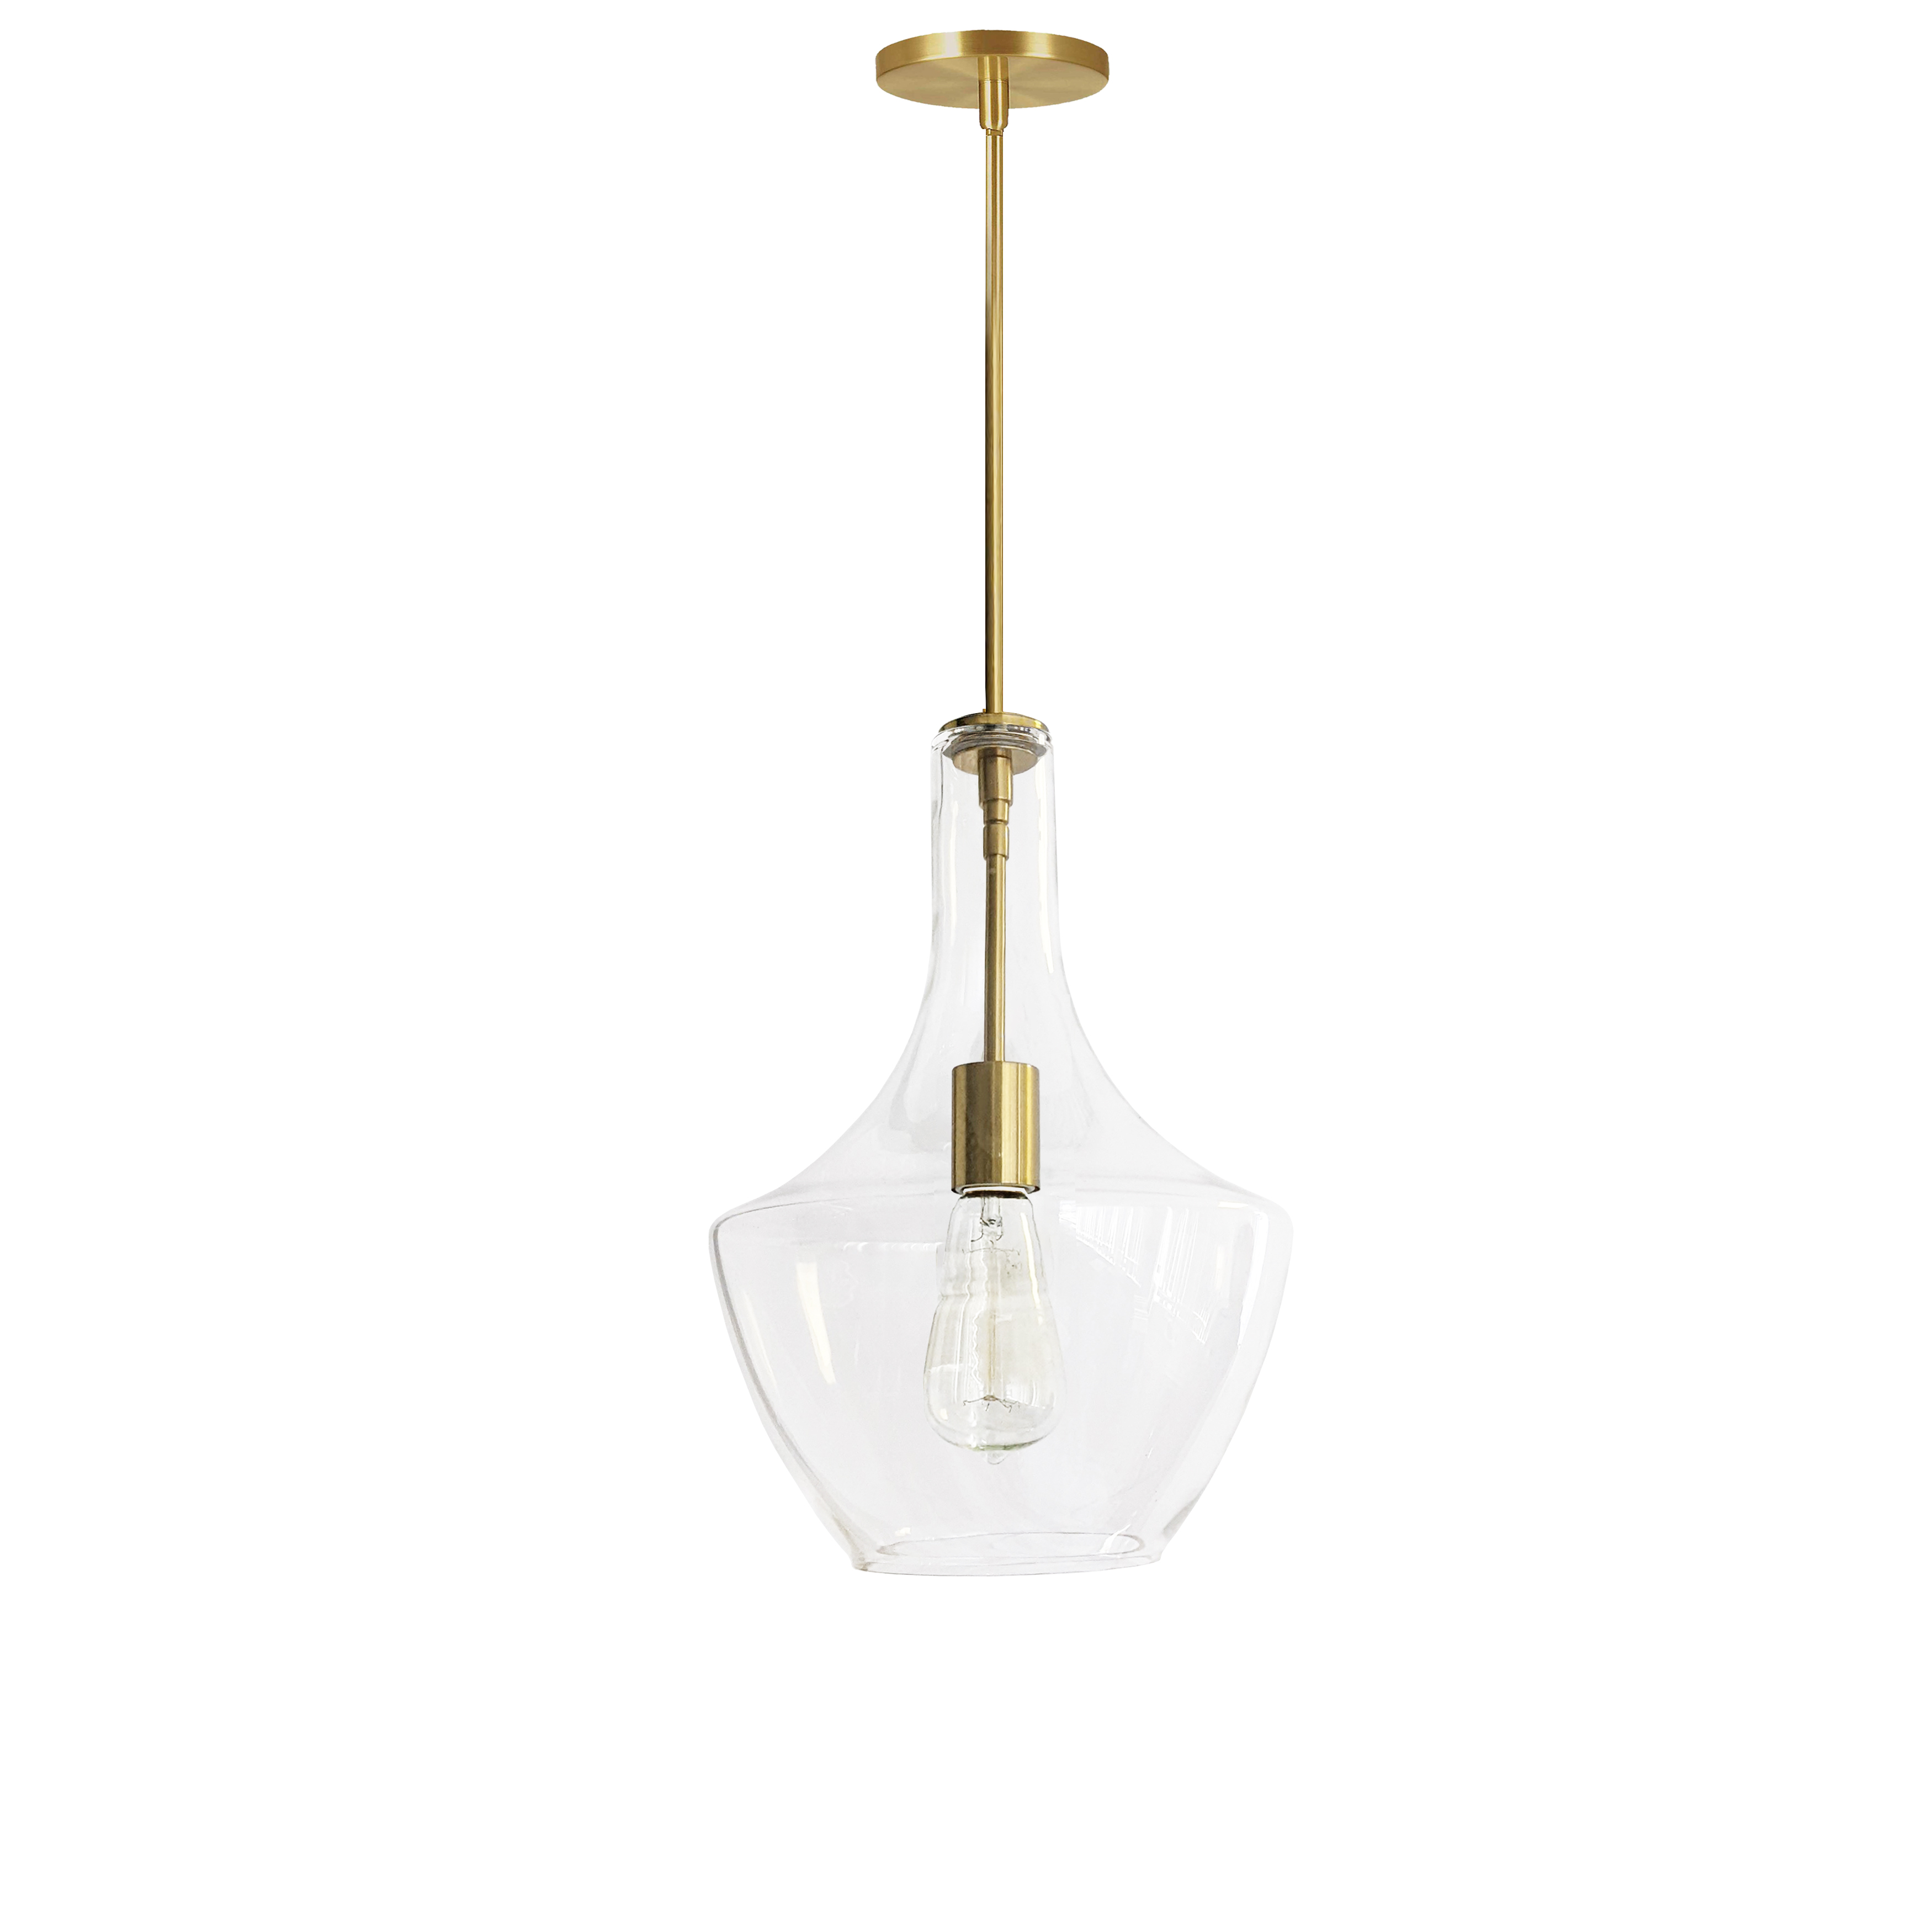 While its graceful lines may evoke the designs of yesteryear, the Petalite family of lighting features a thoroughly contemporary edge. It's the combination of modern minimalism and generous curves that create its unique appeal. A modest metal frame drops into a glass housing in a lyrical curved shape reminiscent of traditional lanterns. The effect is stylish, and will provide bright illumination. Petalite lighting has a sensual silhouette that will enhance your living room, kitchen or foyer.